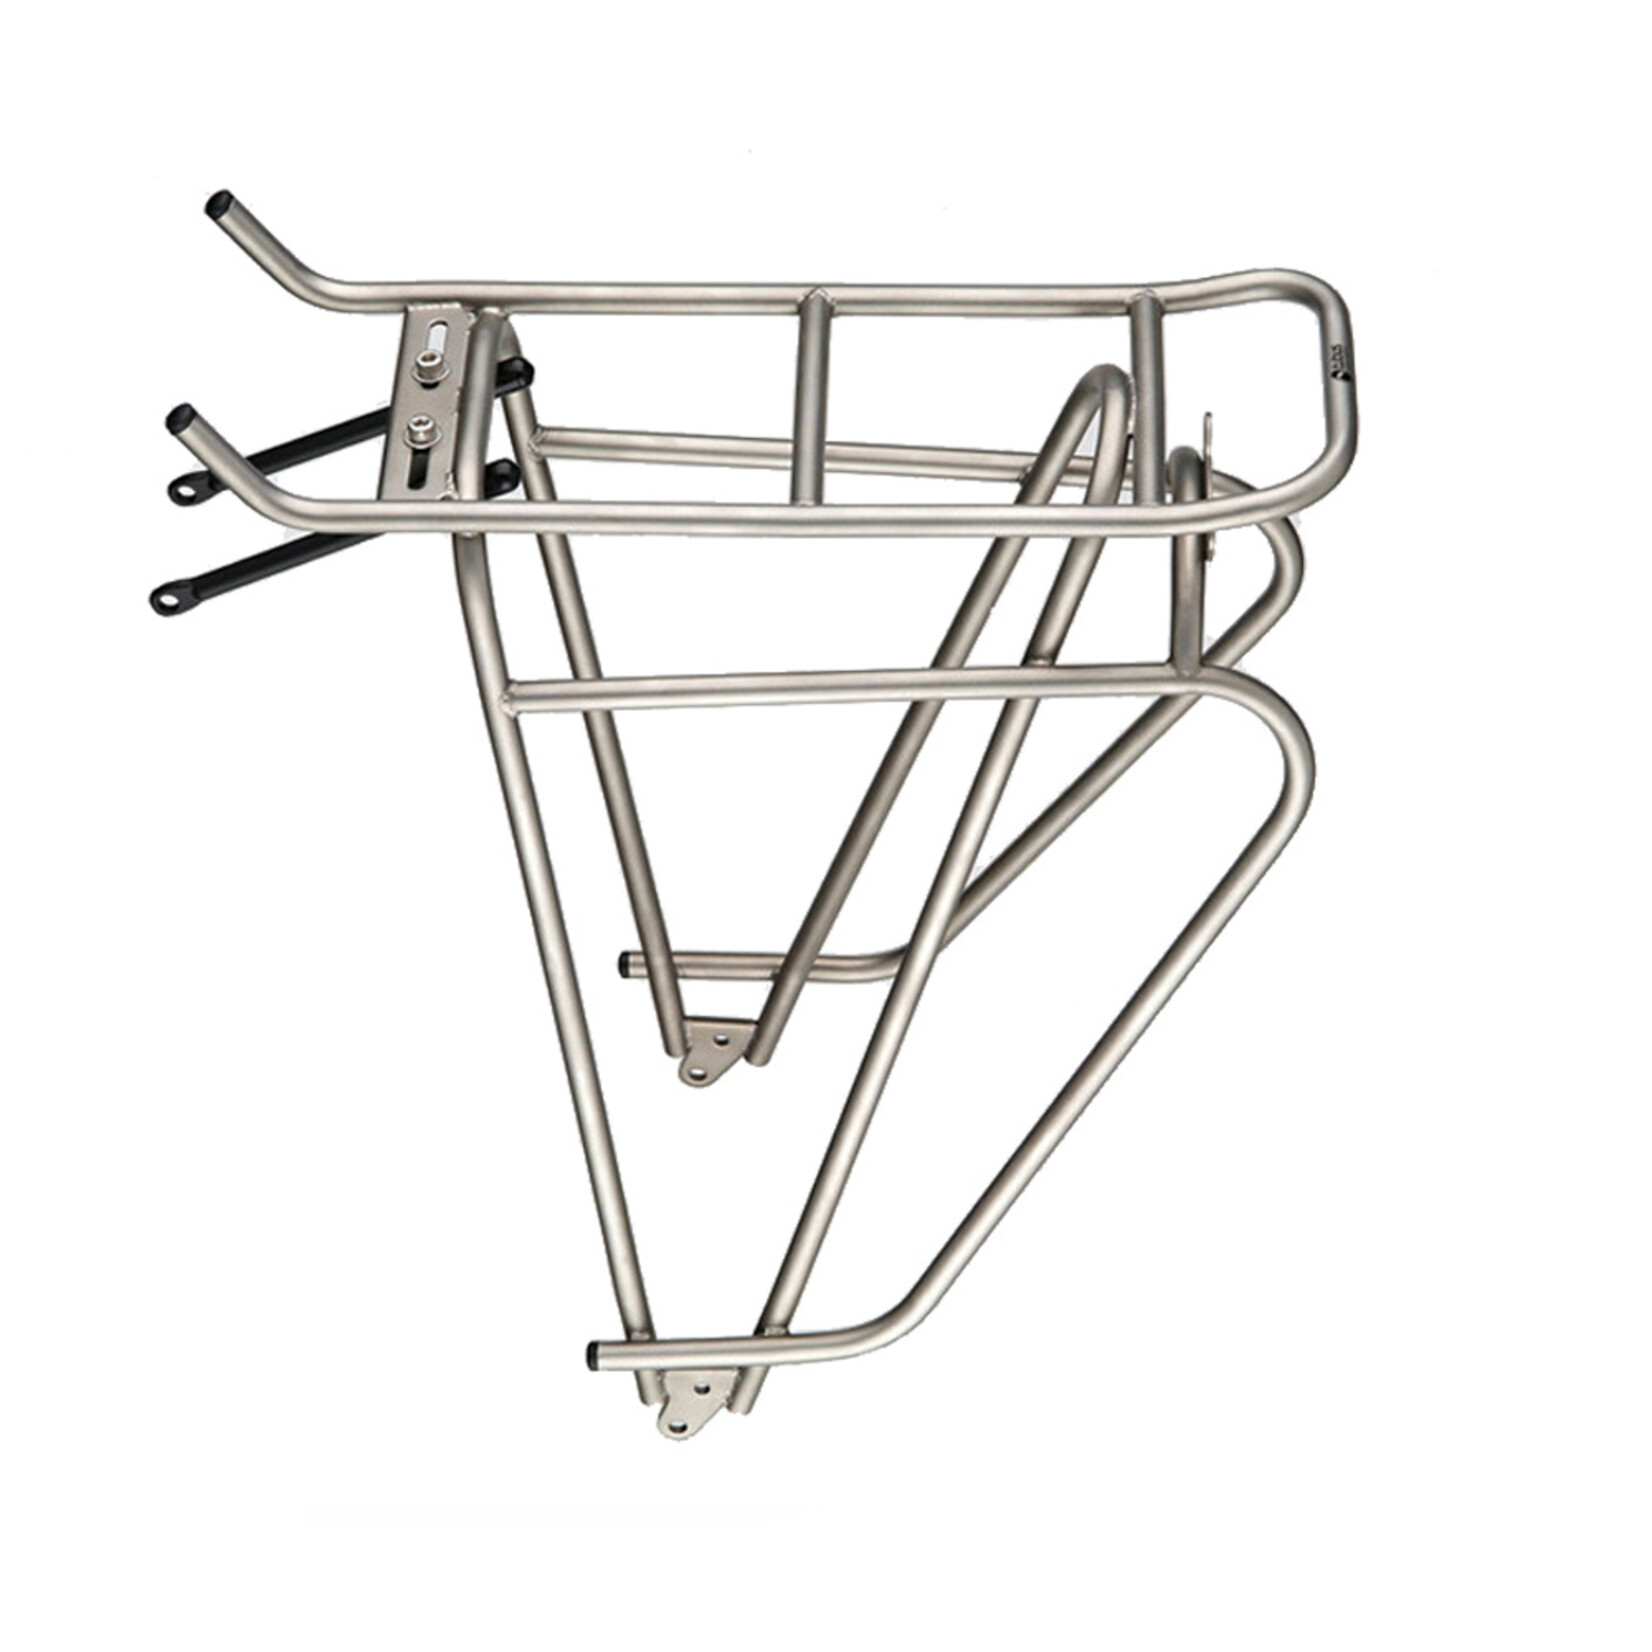 Tubus Tubus Cosmo Stainless - Rear Rack - 70000